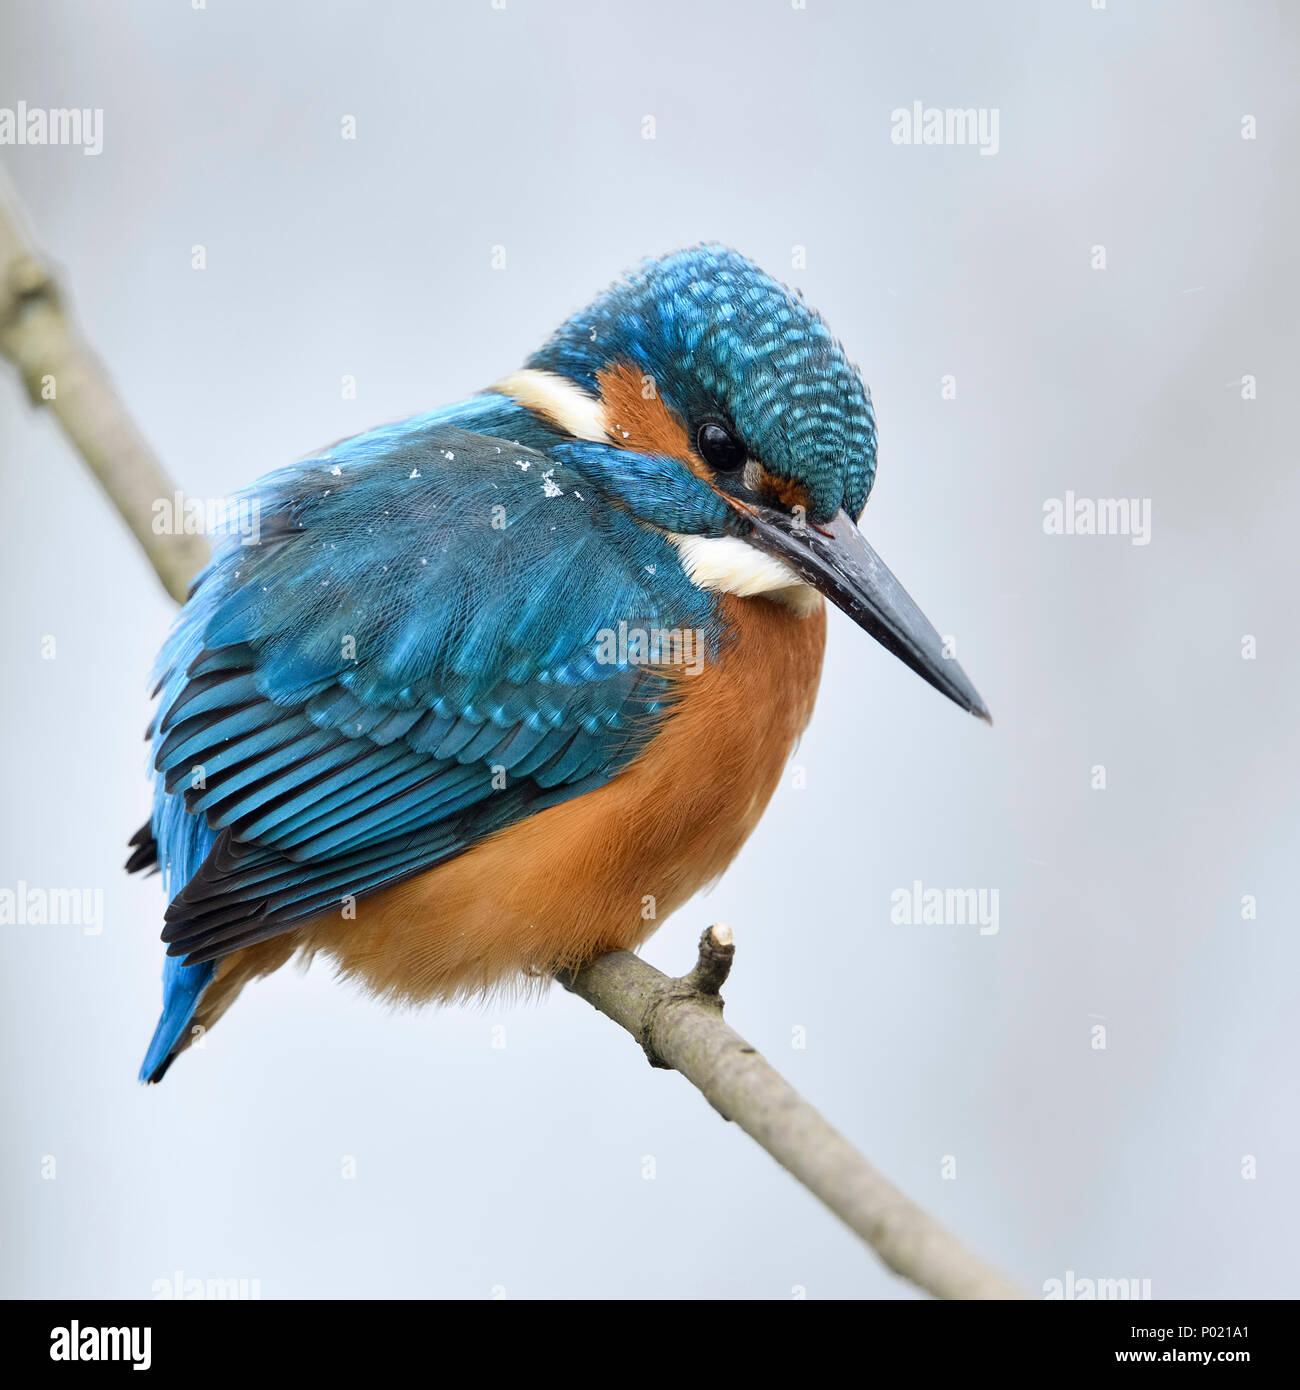 Eurasian Kingfisher / Eisvogel  ( Alcedo atthis ), male in winter, perched on a branch with snowflakes on its back, wildlife, Europe. Stock Photo